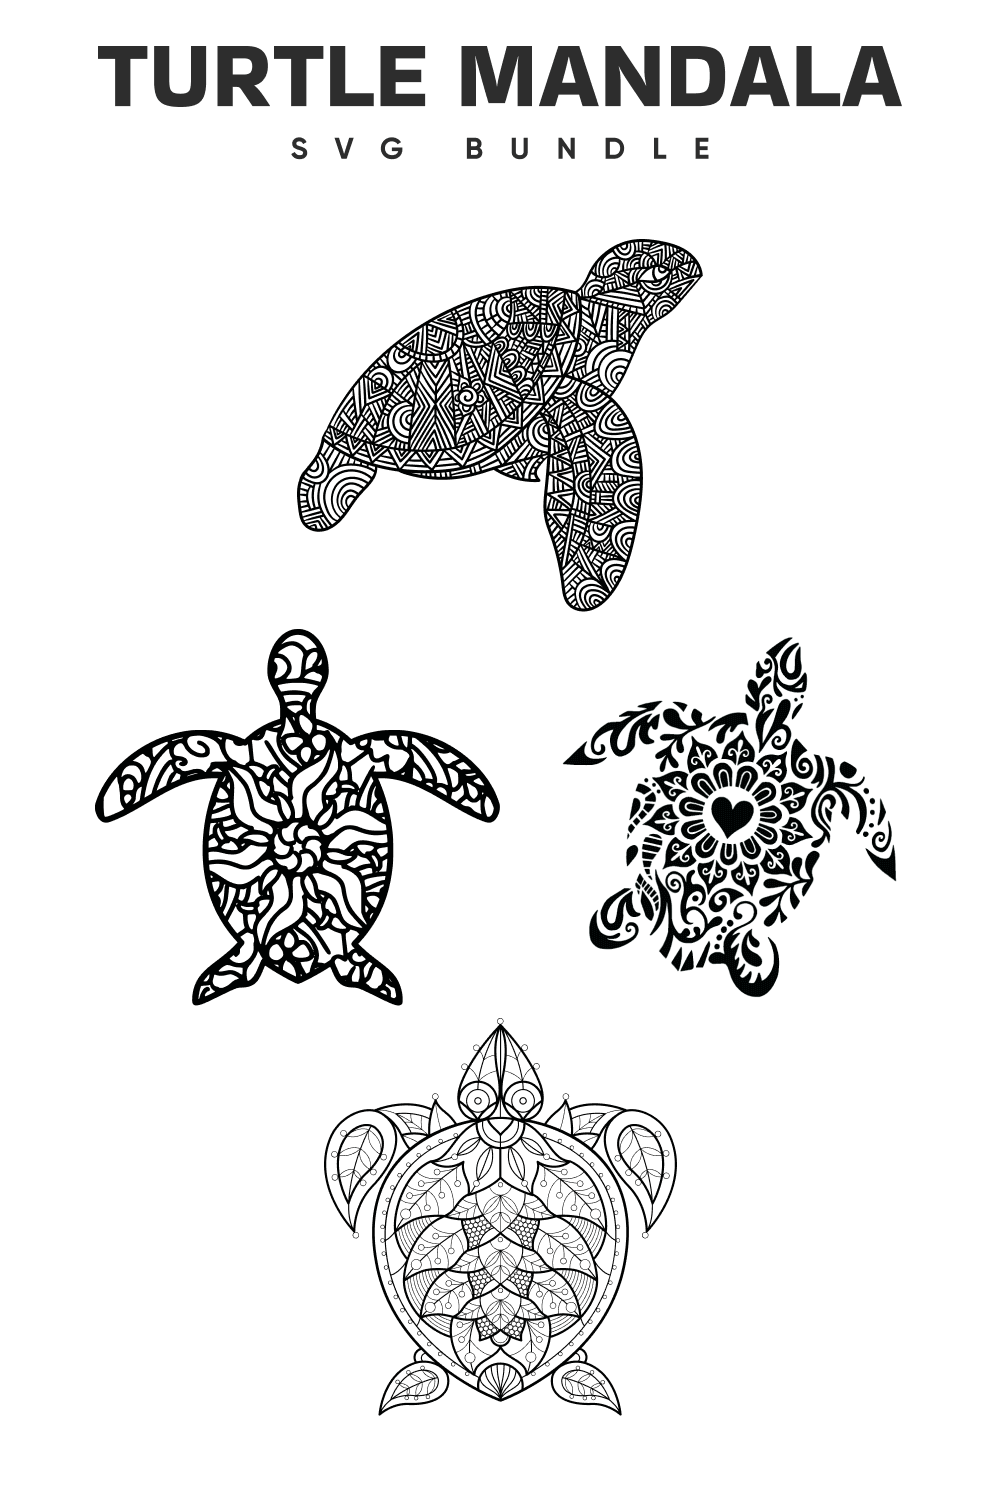 Coloring book with turtles and flowers on it.